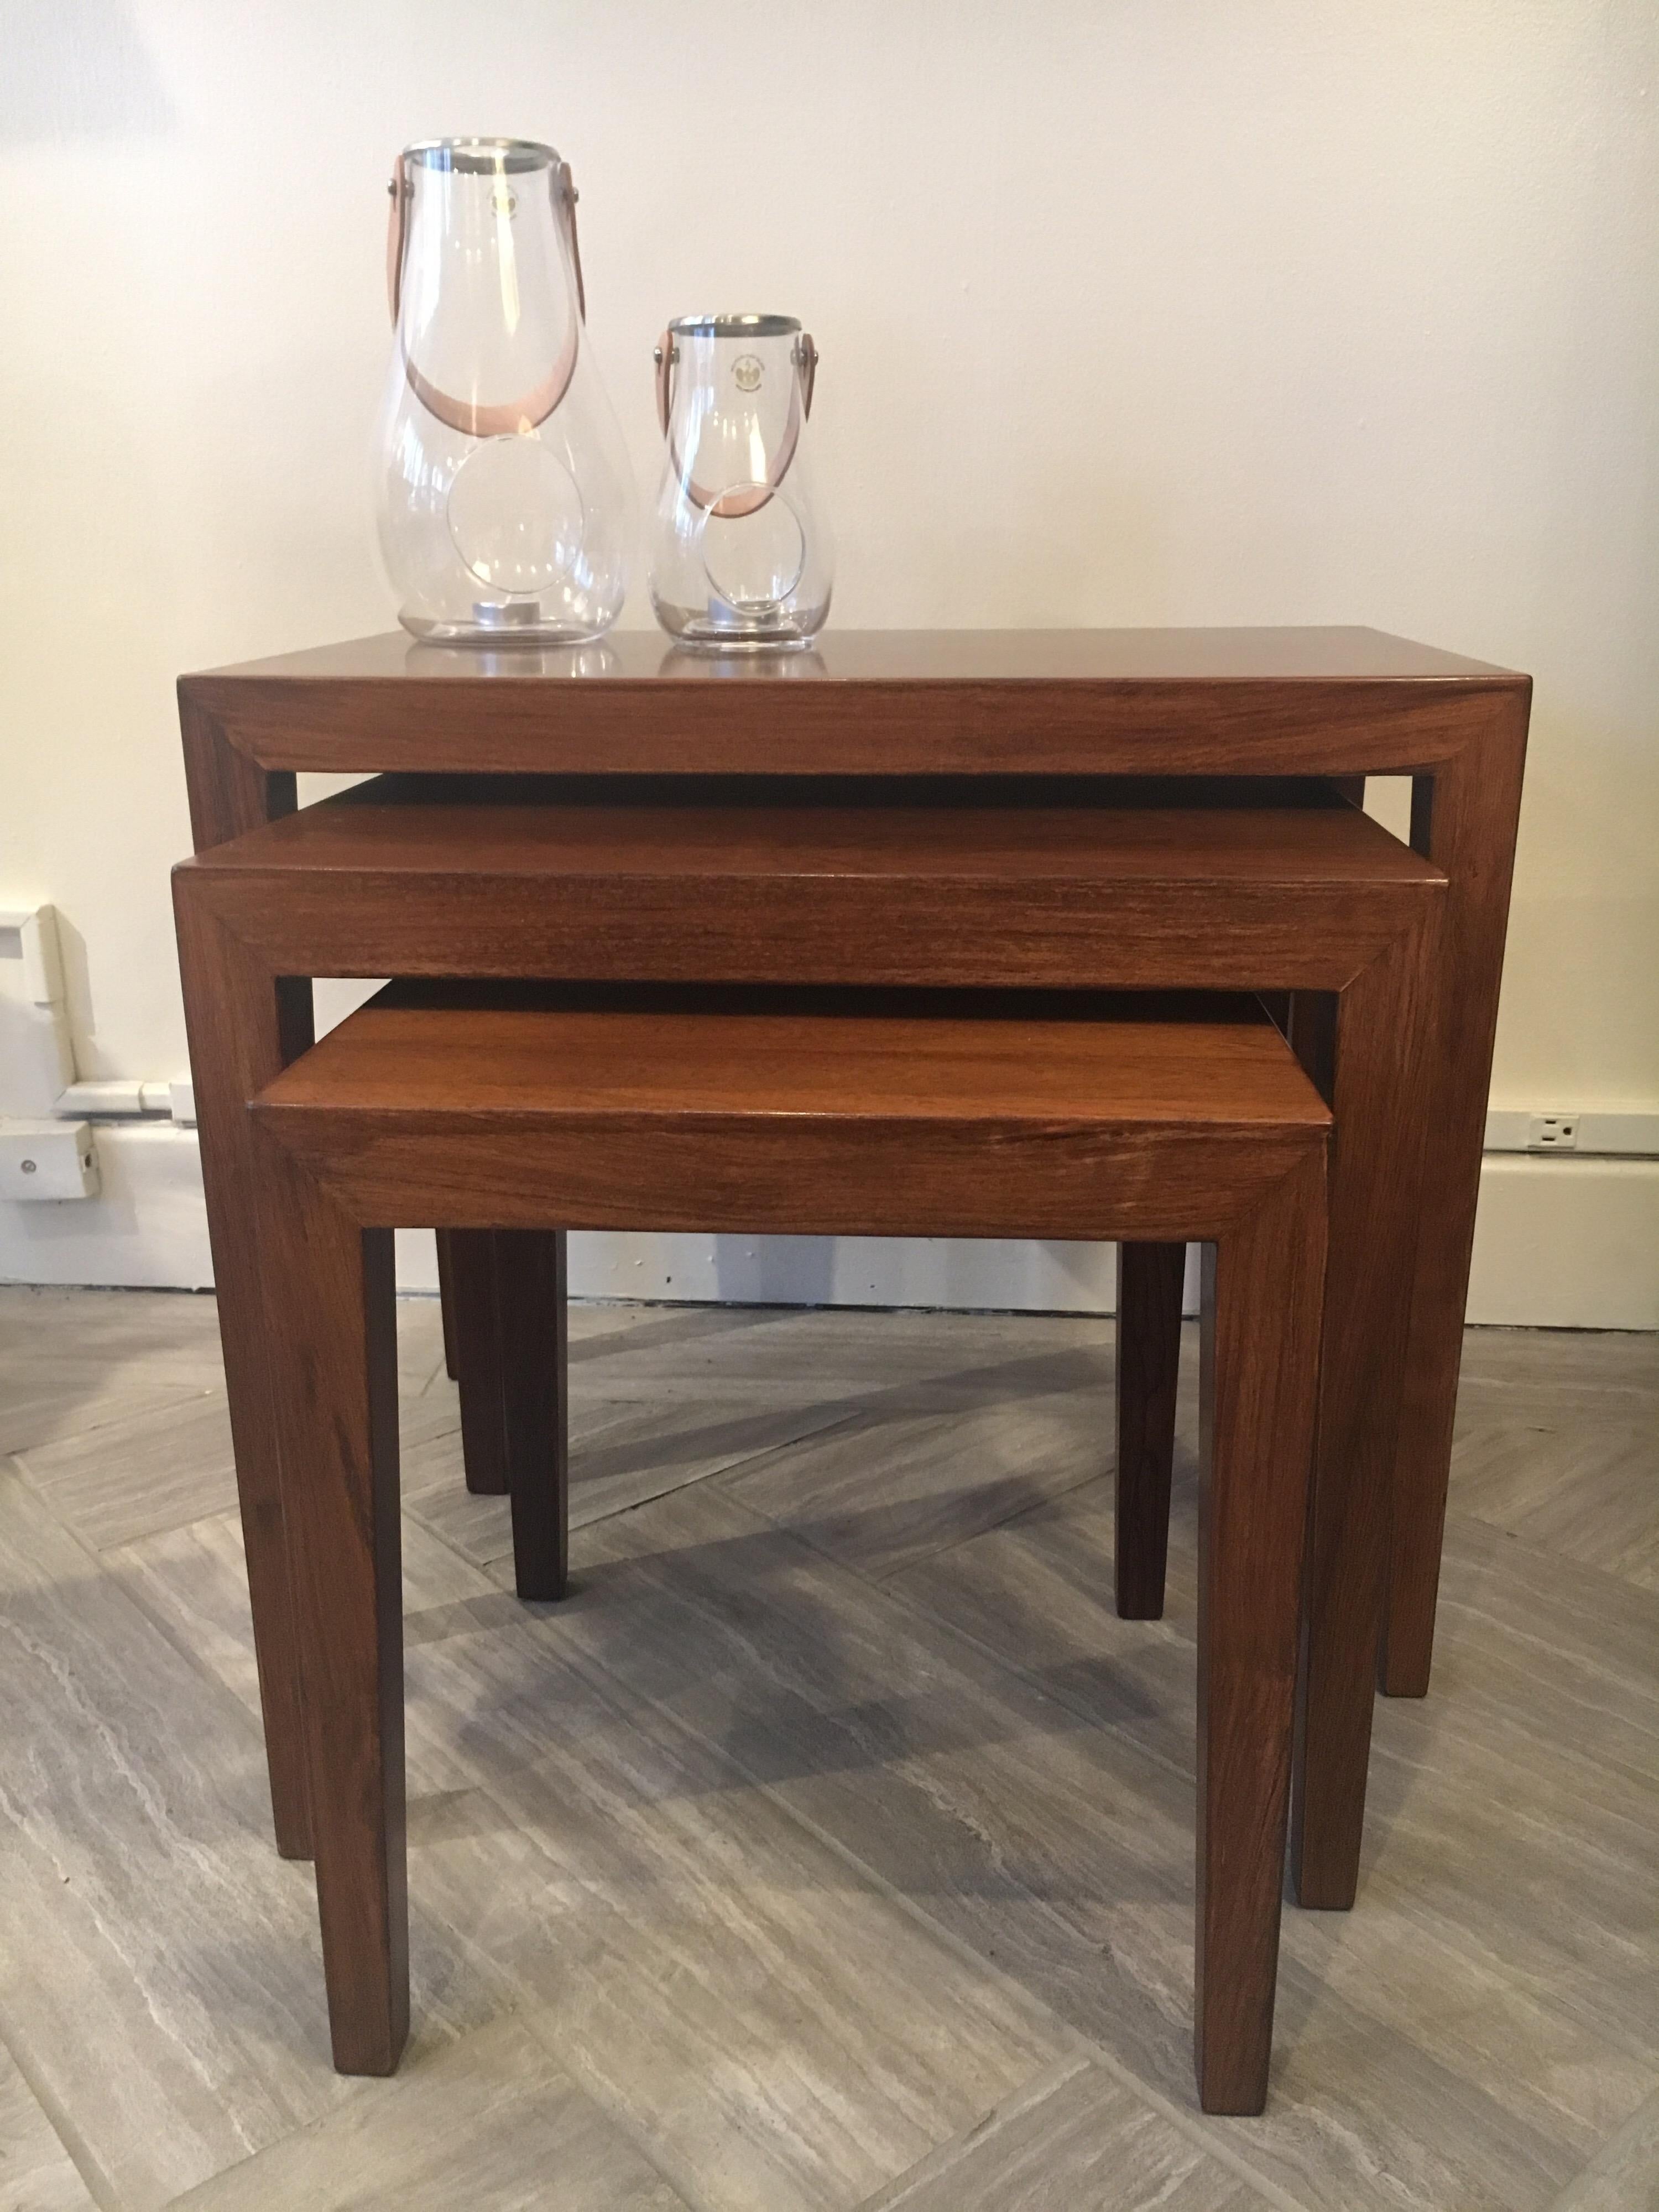 Wonderful set of 3 Danish Modern rosewood nesting tables by Haslev Moebel Fabrik, model 163. Versatile and chic, with beautiful lustre and patina. Perfect as side tables, end tables, or coffee tables to add that Mid Century Modern look with beauty